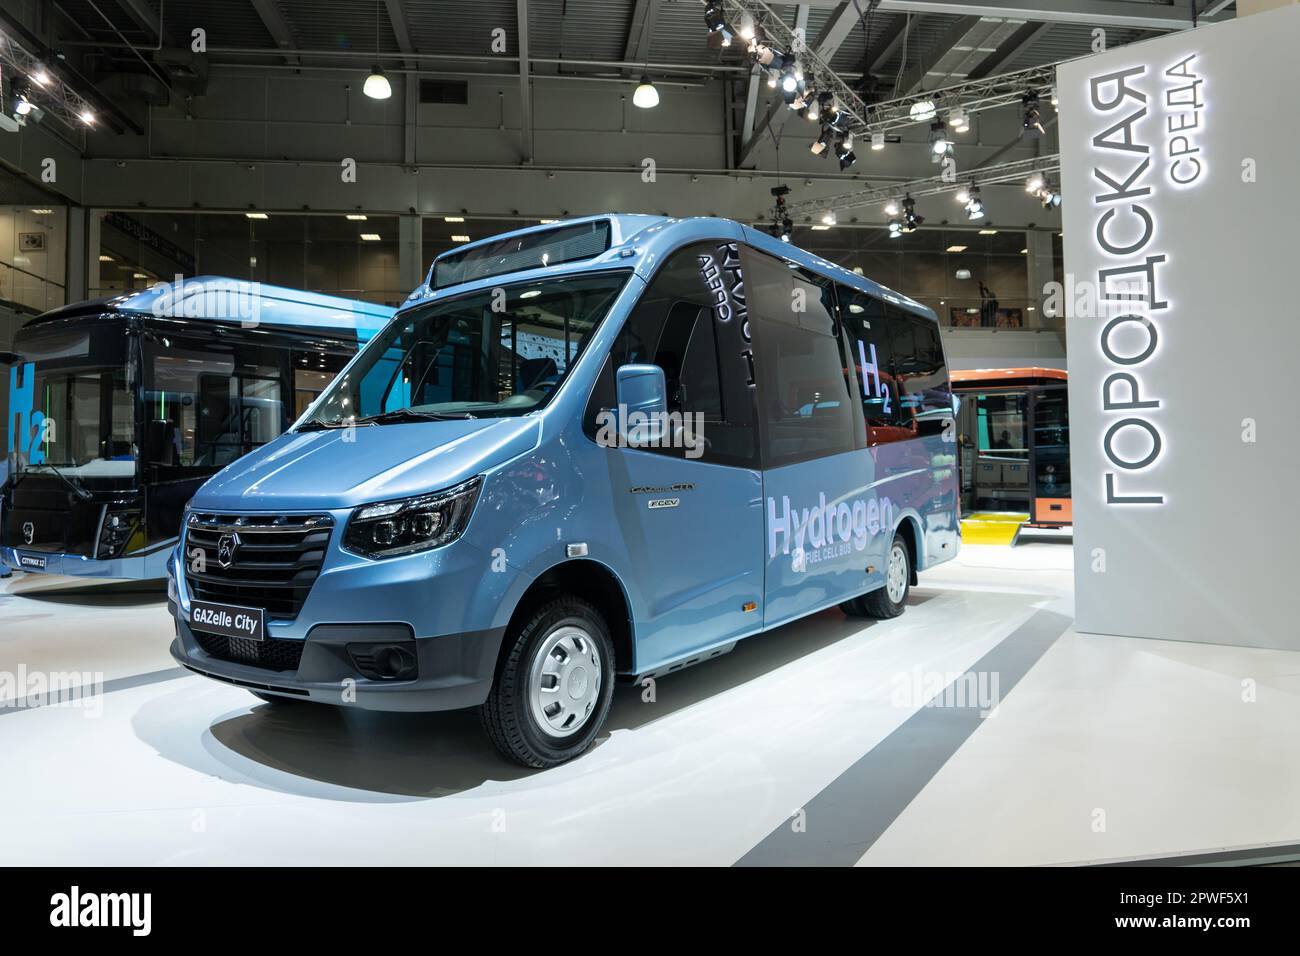 Moscow, Russia - September, 2021: Hydrogen fuel cell electric bus Gazelle CITY on exhibition Comtrans 2021 Stock Photo